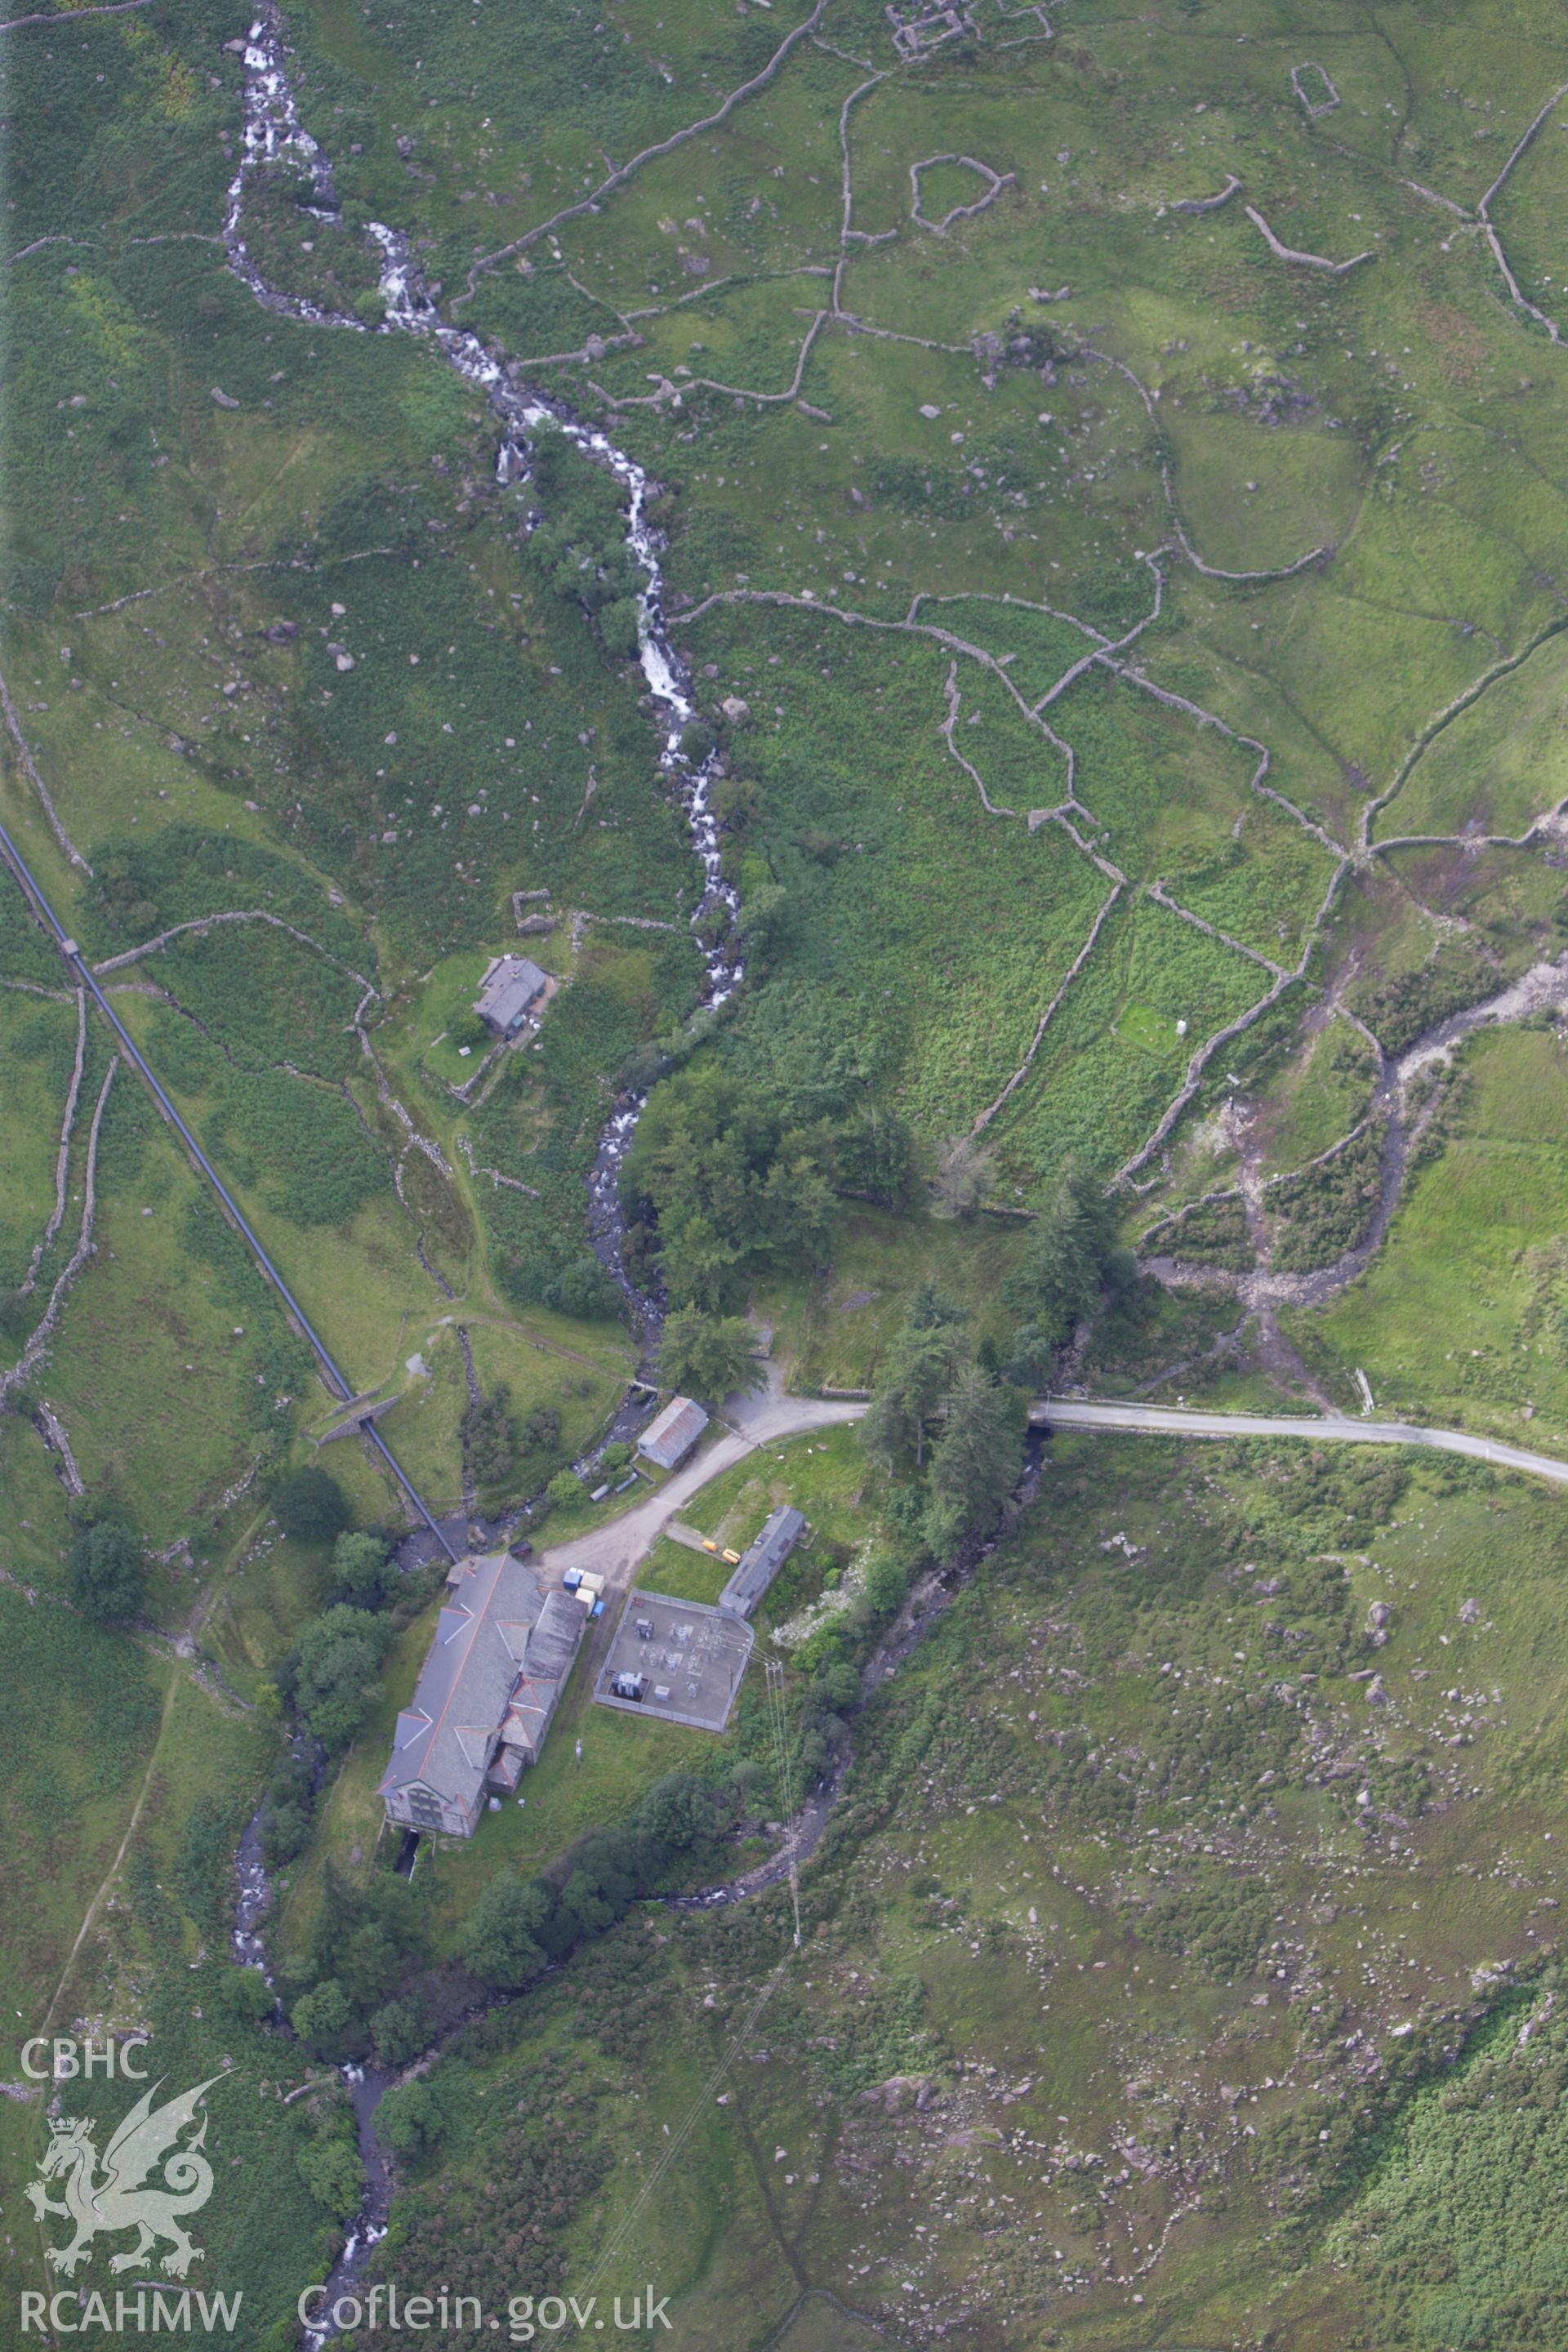 RCAHMW colour oblique aerial photograph of a hut circle settlement north of Cwm Dyli Power Station. Taken on 06 August 2009 by Toby Driver